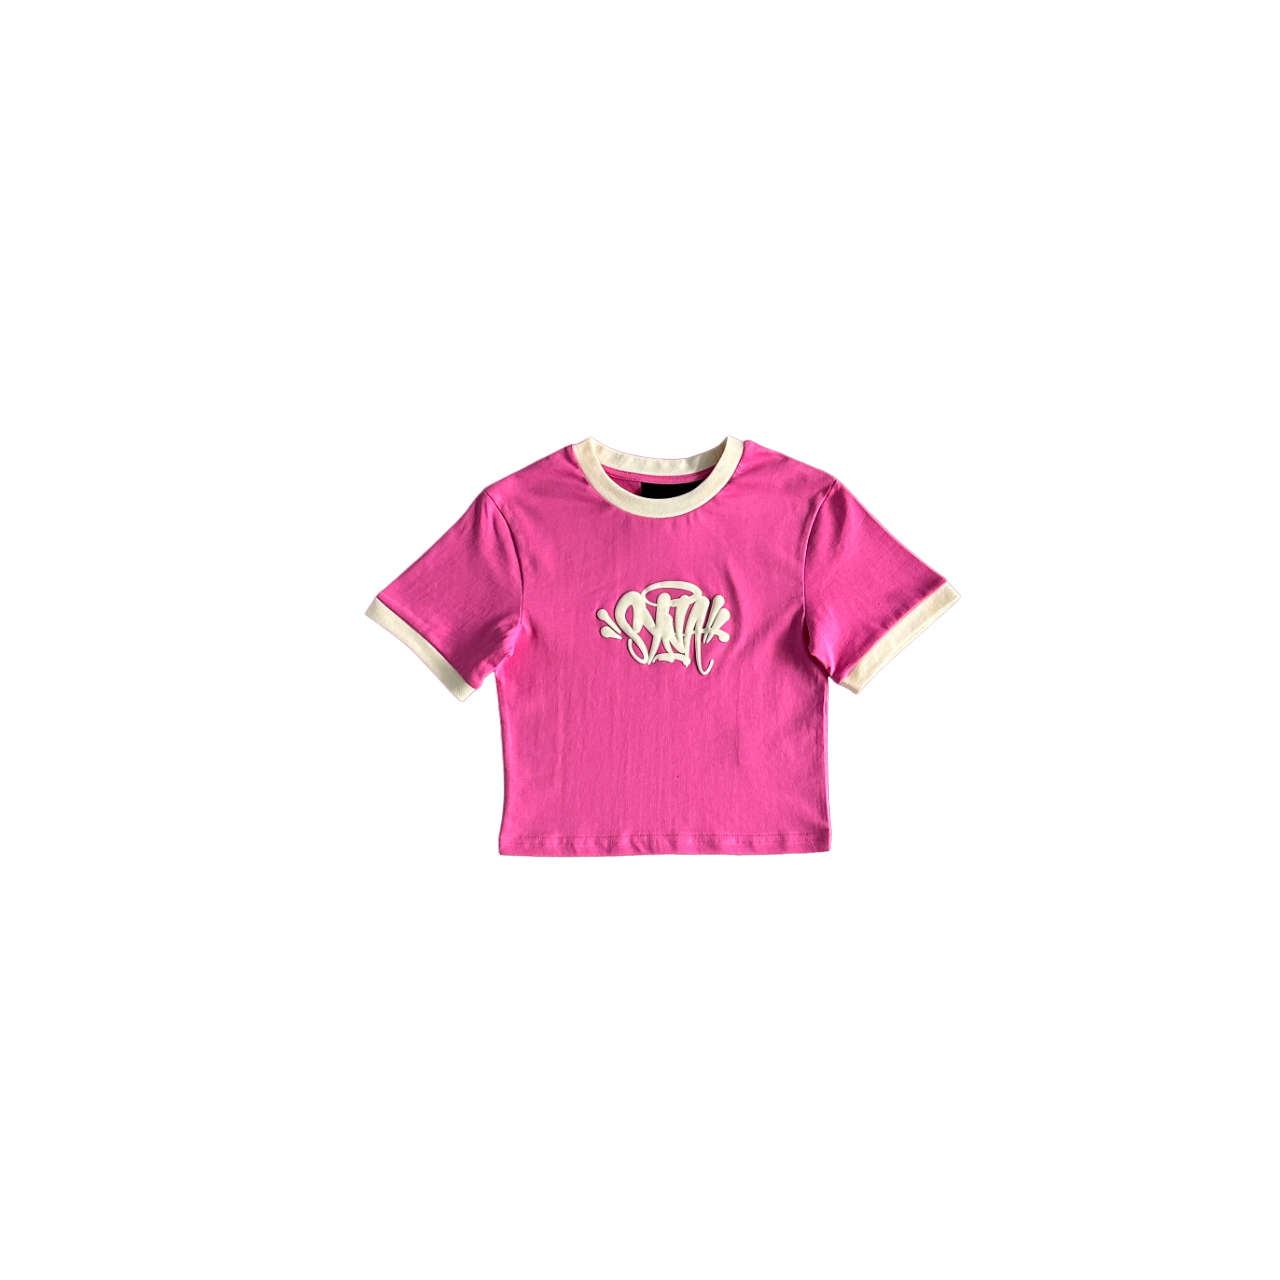 Syna World Team Womens Twinset - (PINK)